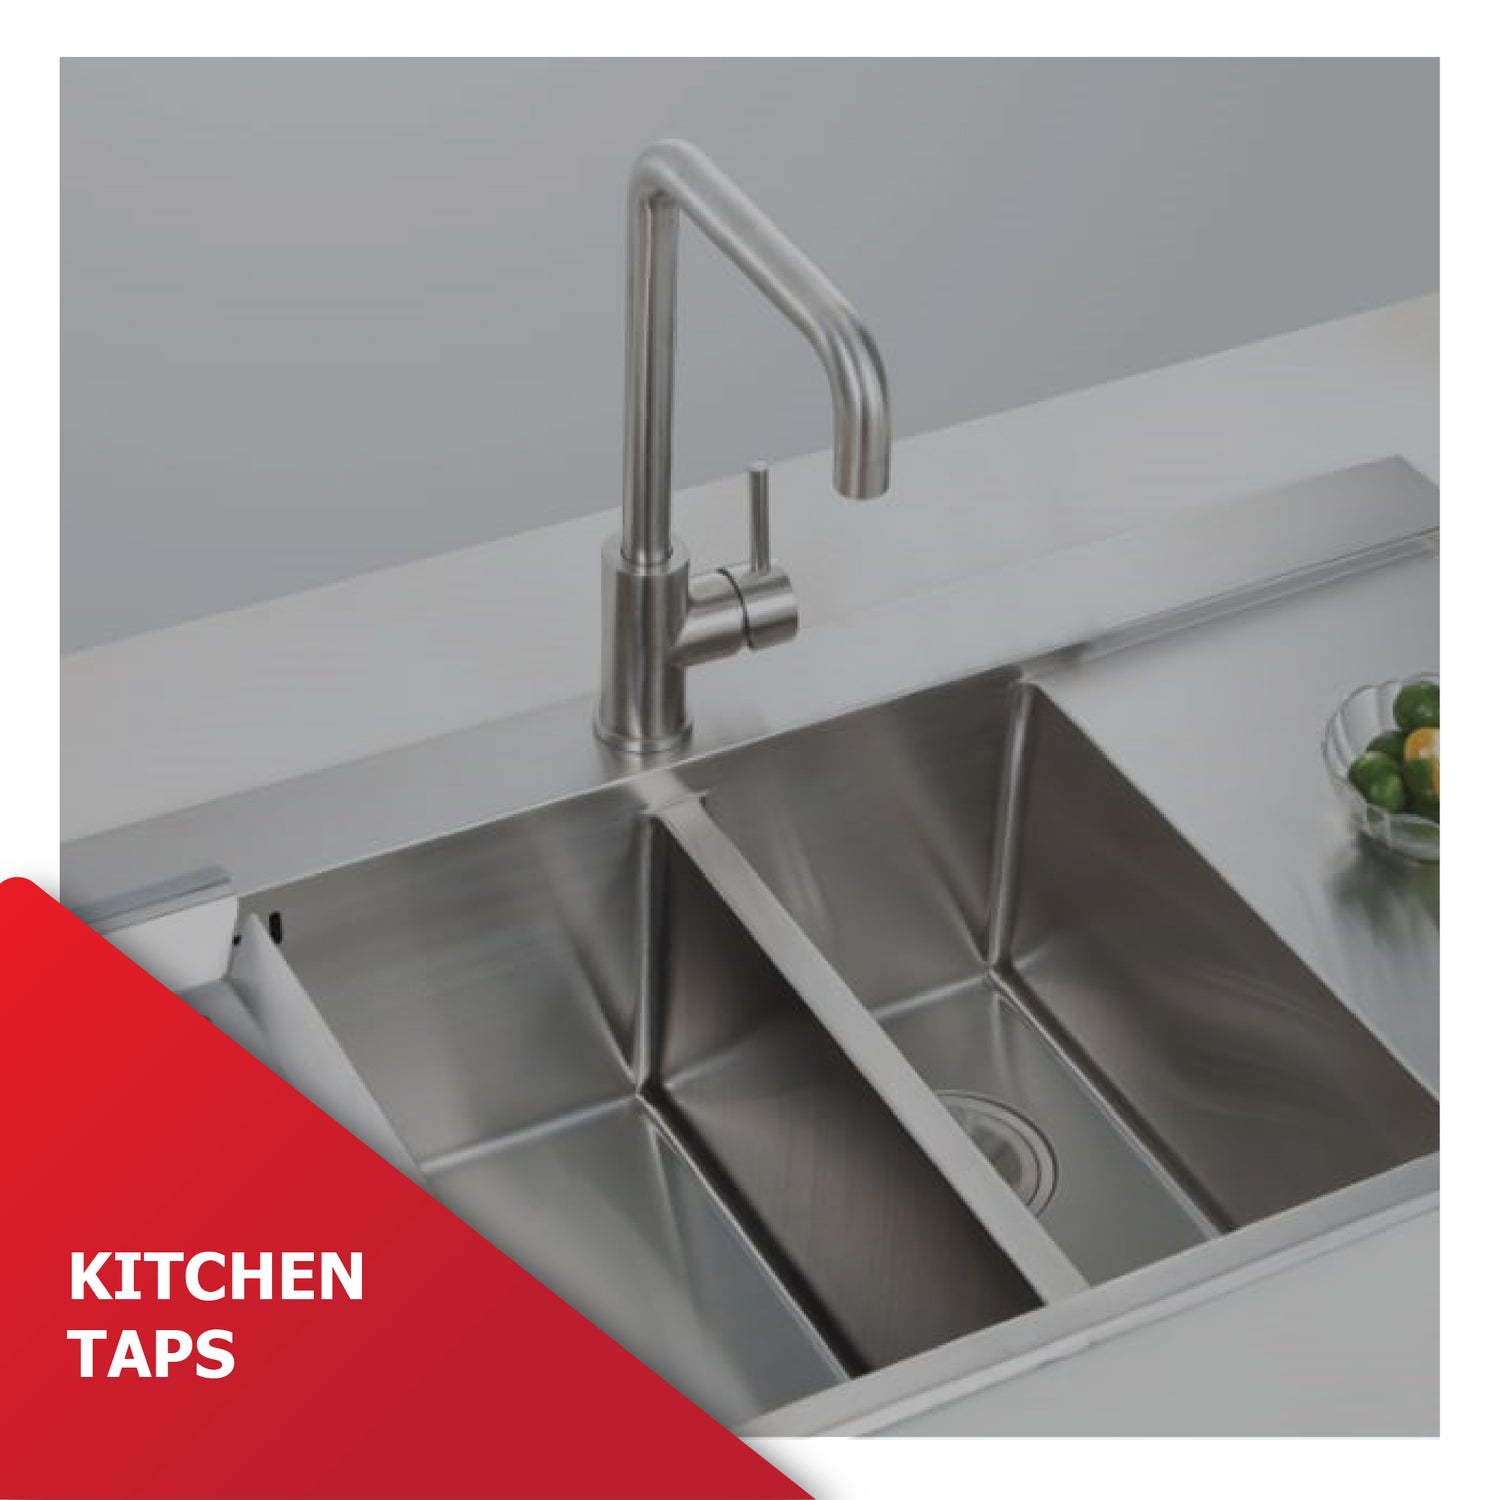 Stylish and functional kitchen taps by M. M. Noorbhoy & Co - Enhance your kitchen experience with high-quality options.